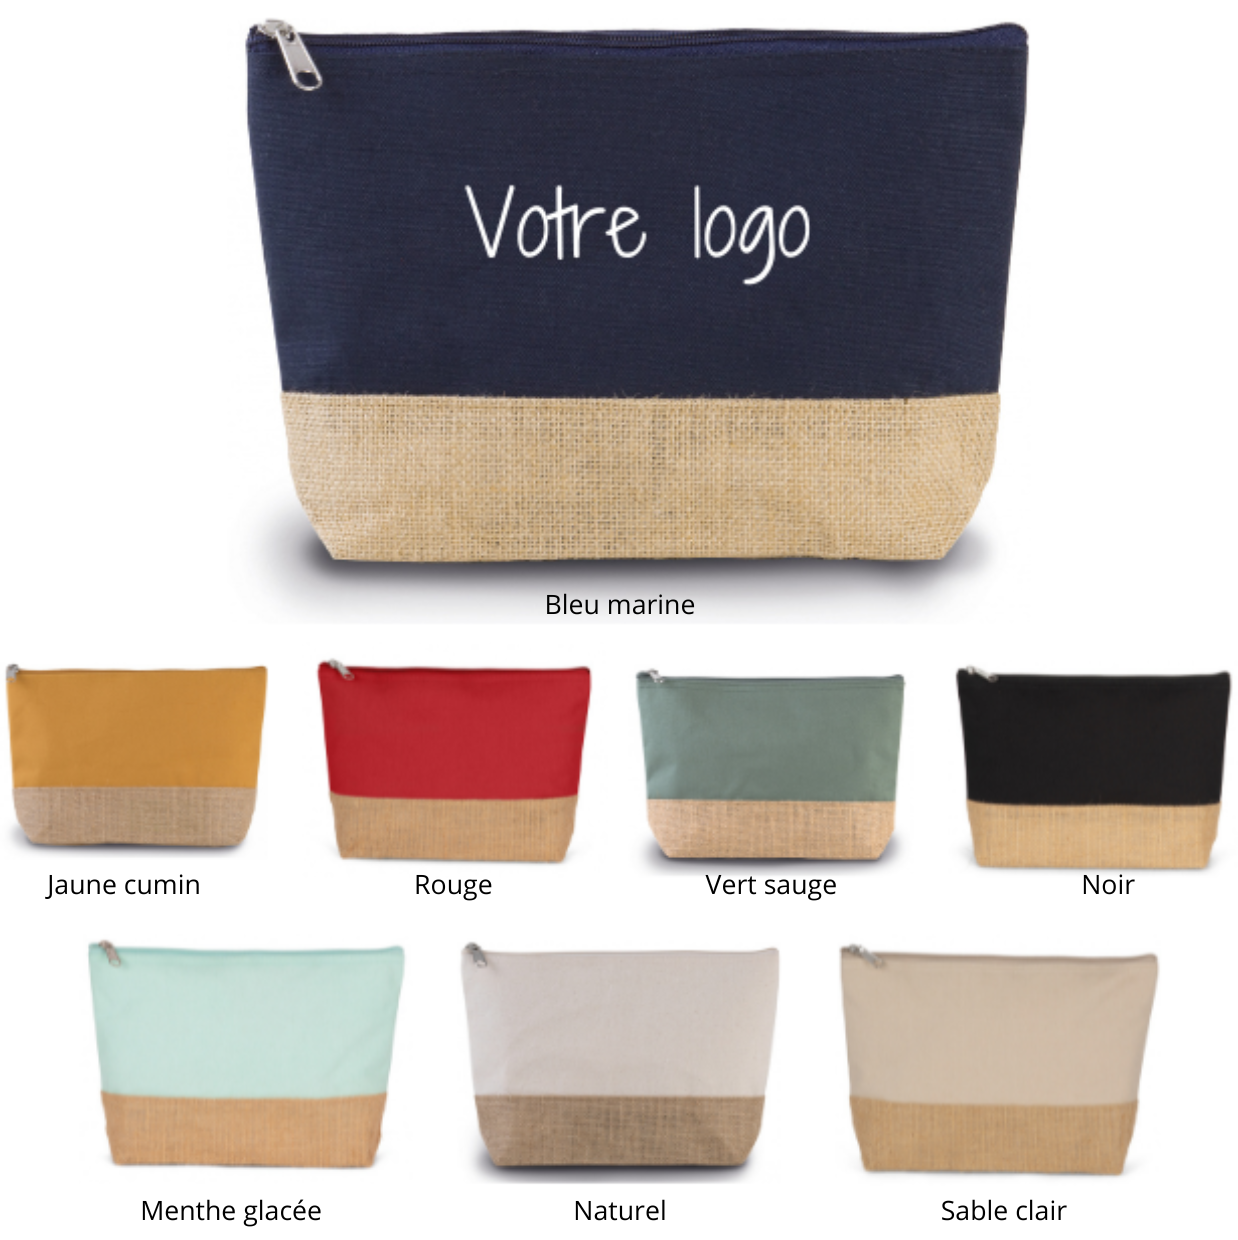 Cotton and jute travel pouch TT0276